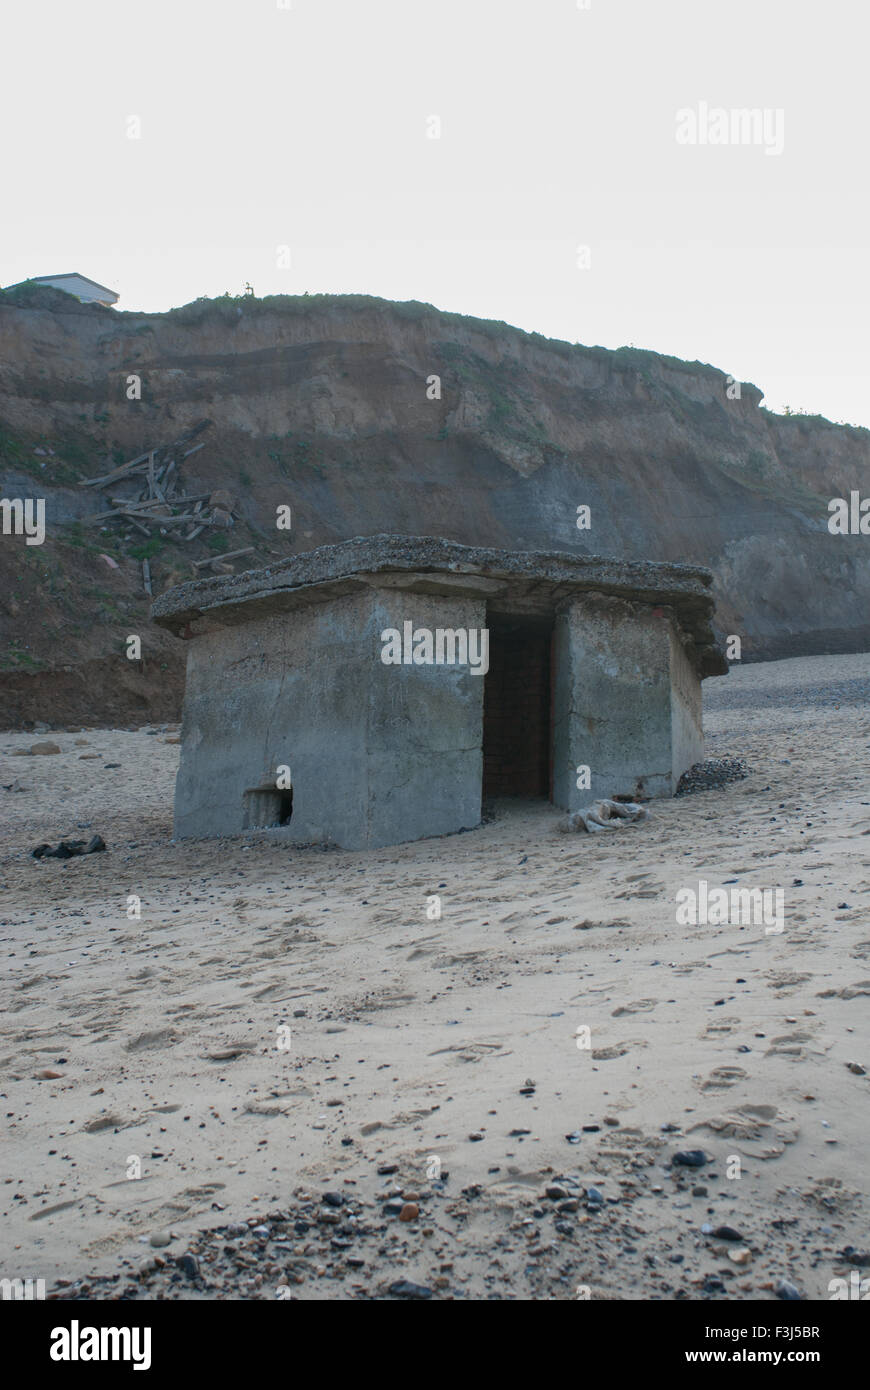 Old pill box on a deserted beach Stock Photo